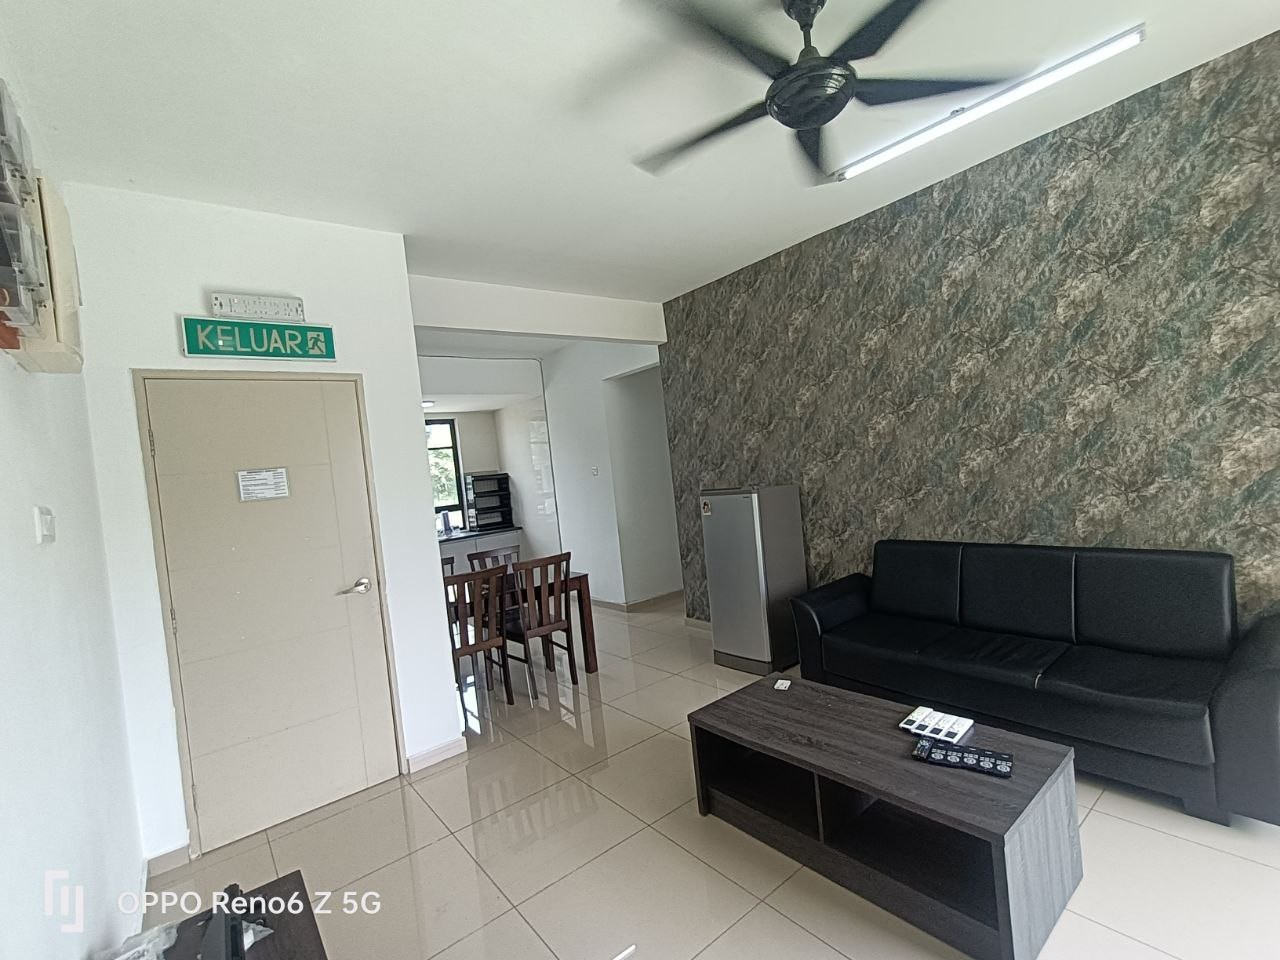 The Meadow Park, Kampar, Perak, 3 Storey Townhouse, For rent, Gated And Guarded, Fully Furnished, 3 Car Parking, With Balcony.